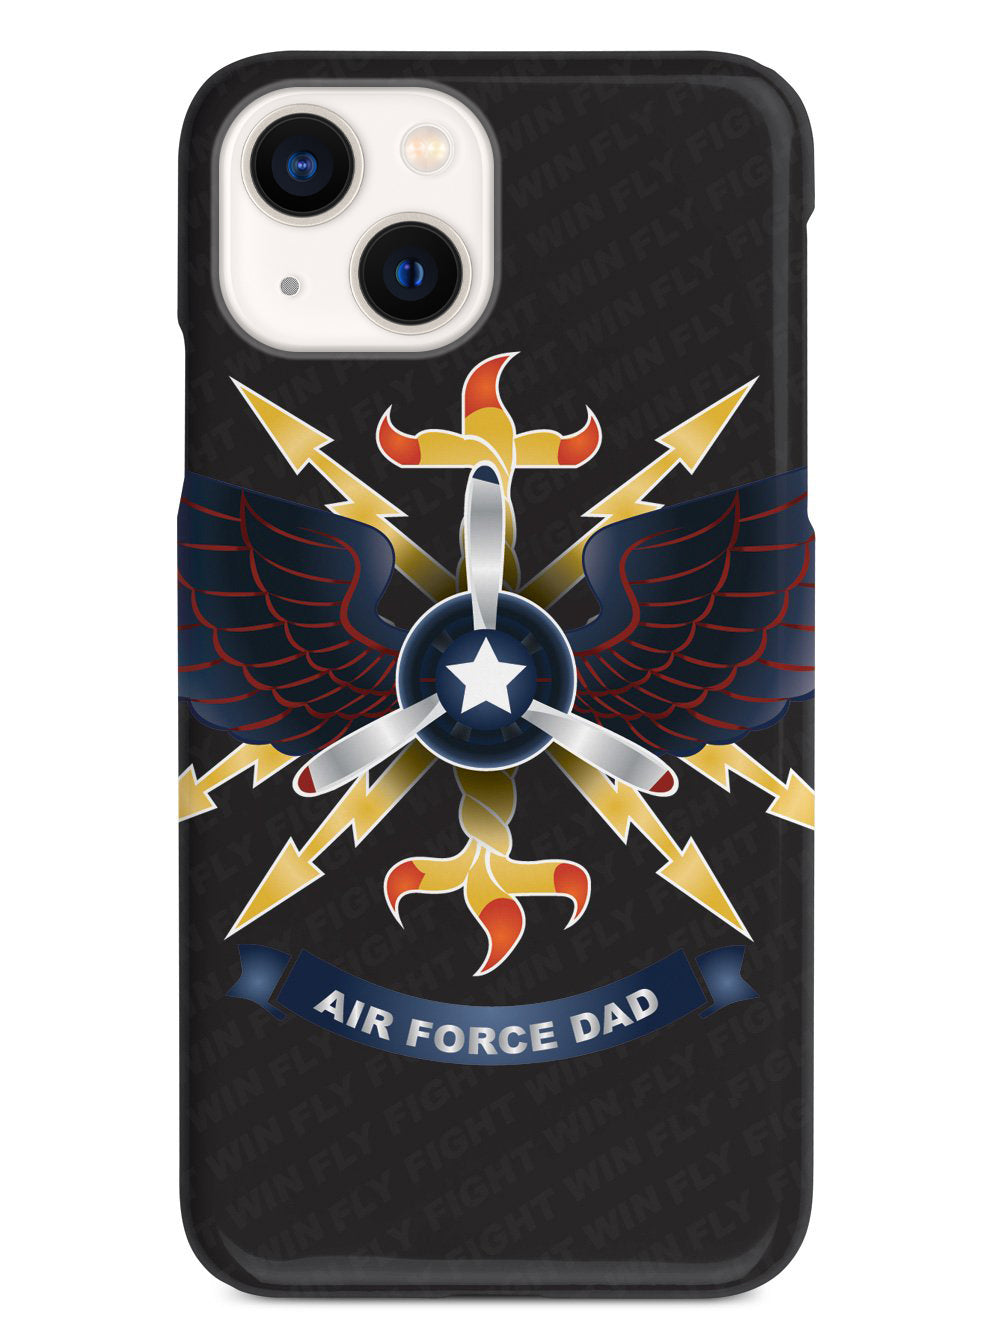 Air Force Dad Case